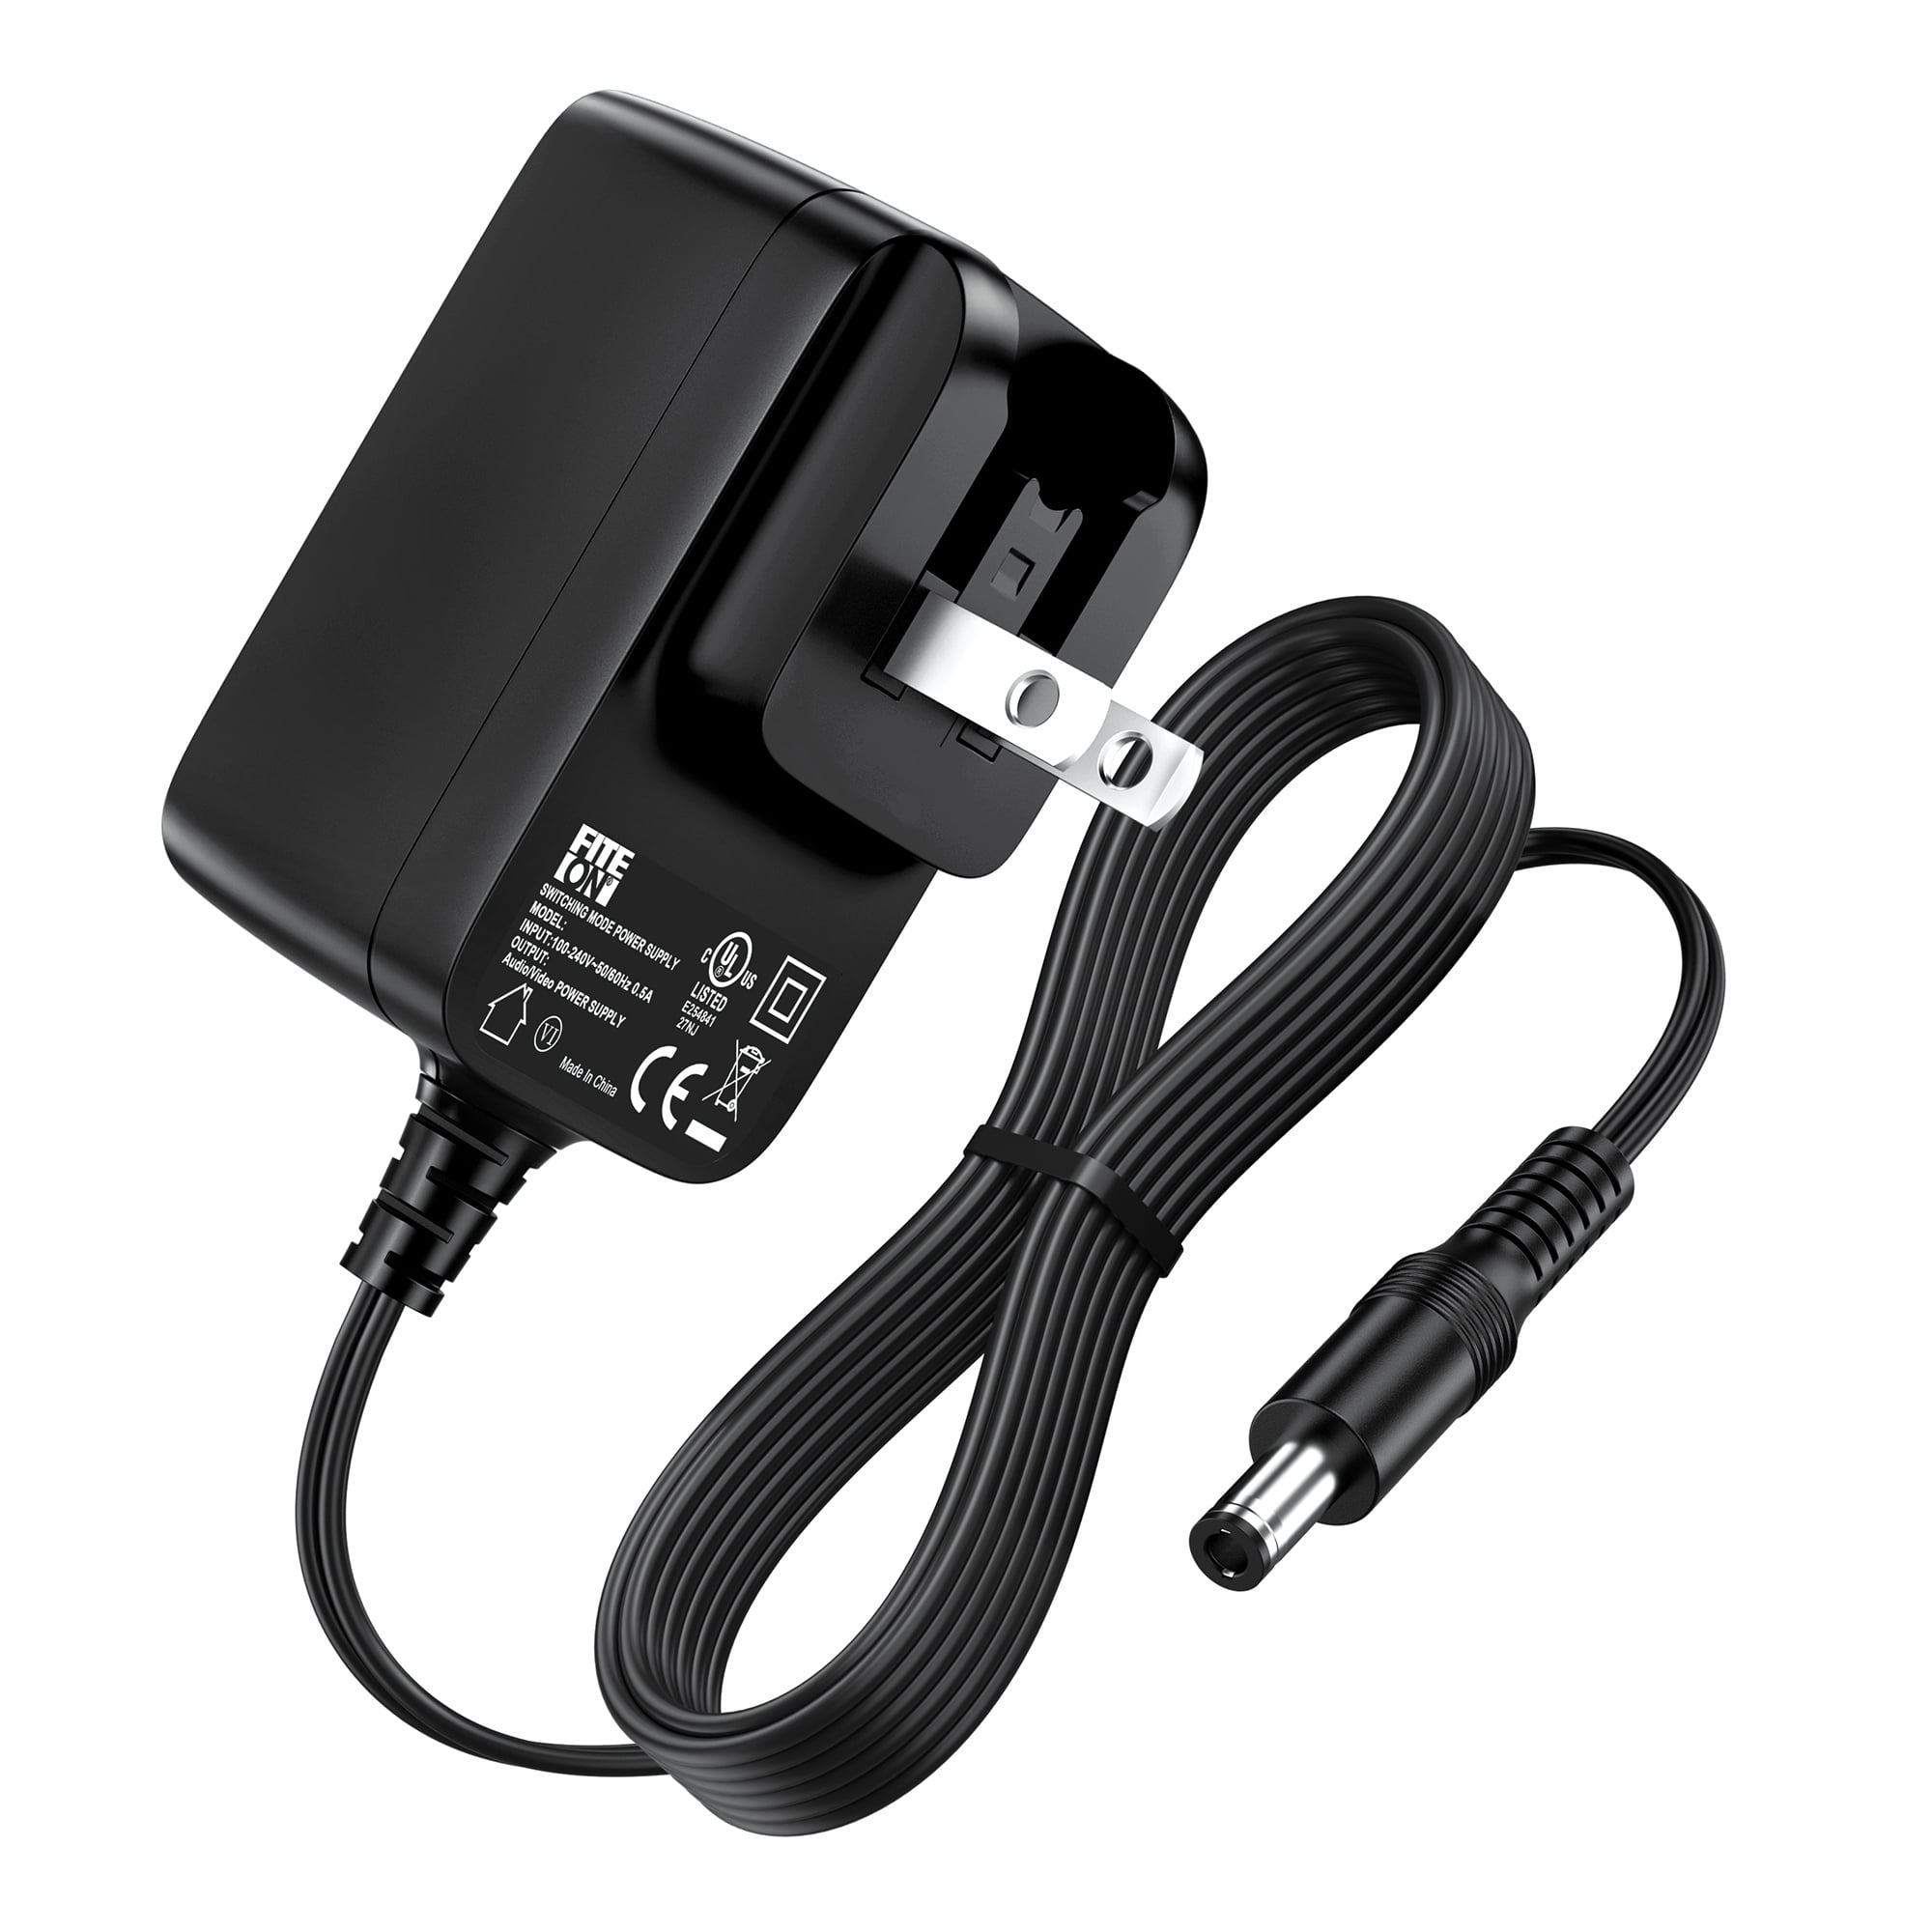 US Plug Wall AC Charger for 18650 Rechargeable Battery Headlamp Flashlight XI 